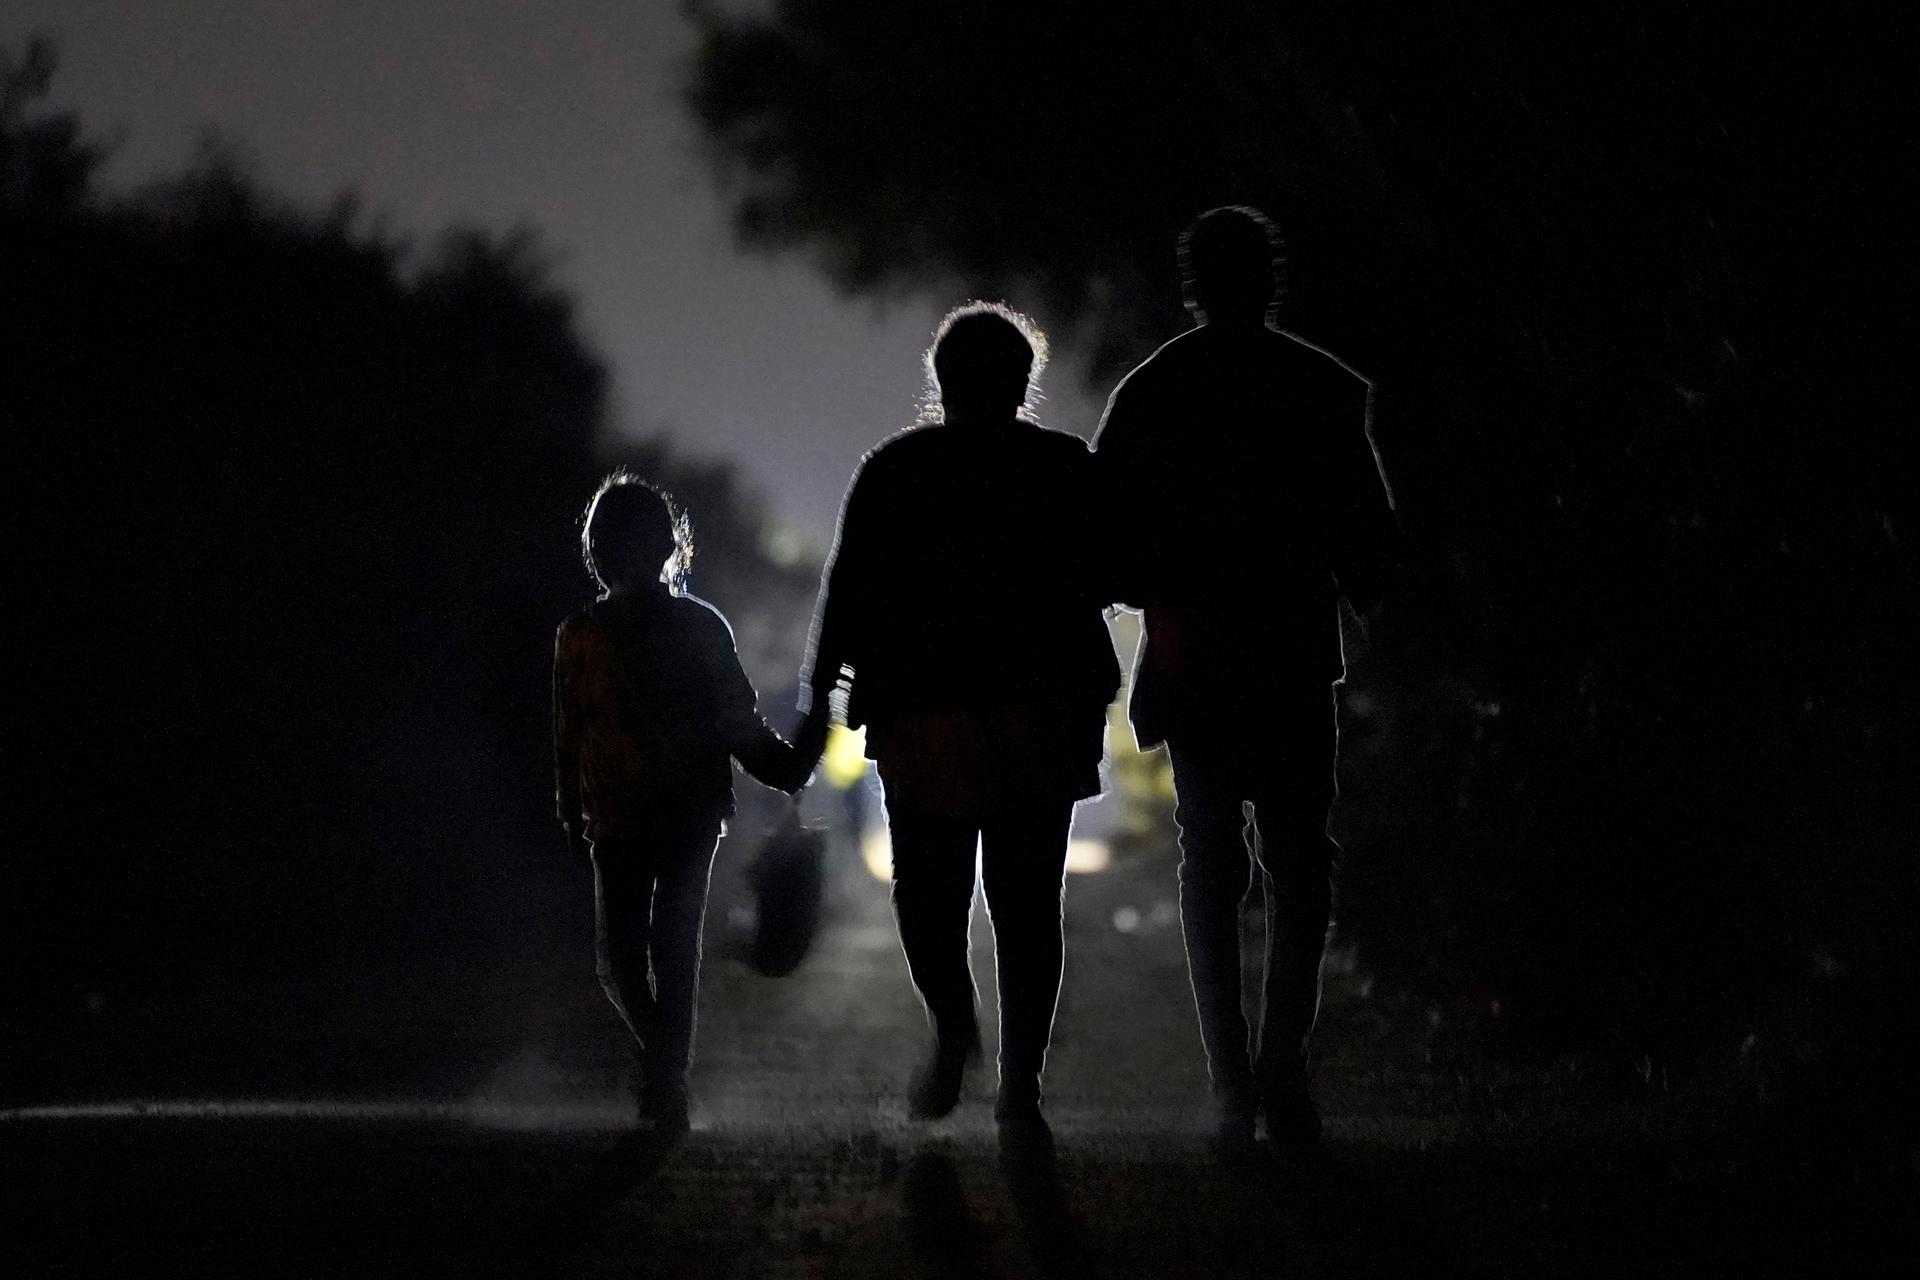 Figures of a 7-year-old migrant girl walking with a woman and unidentified man silhouetted at night